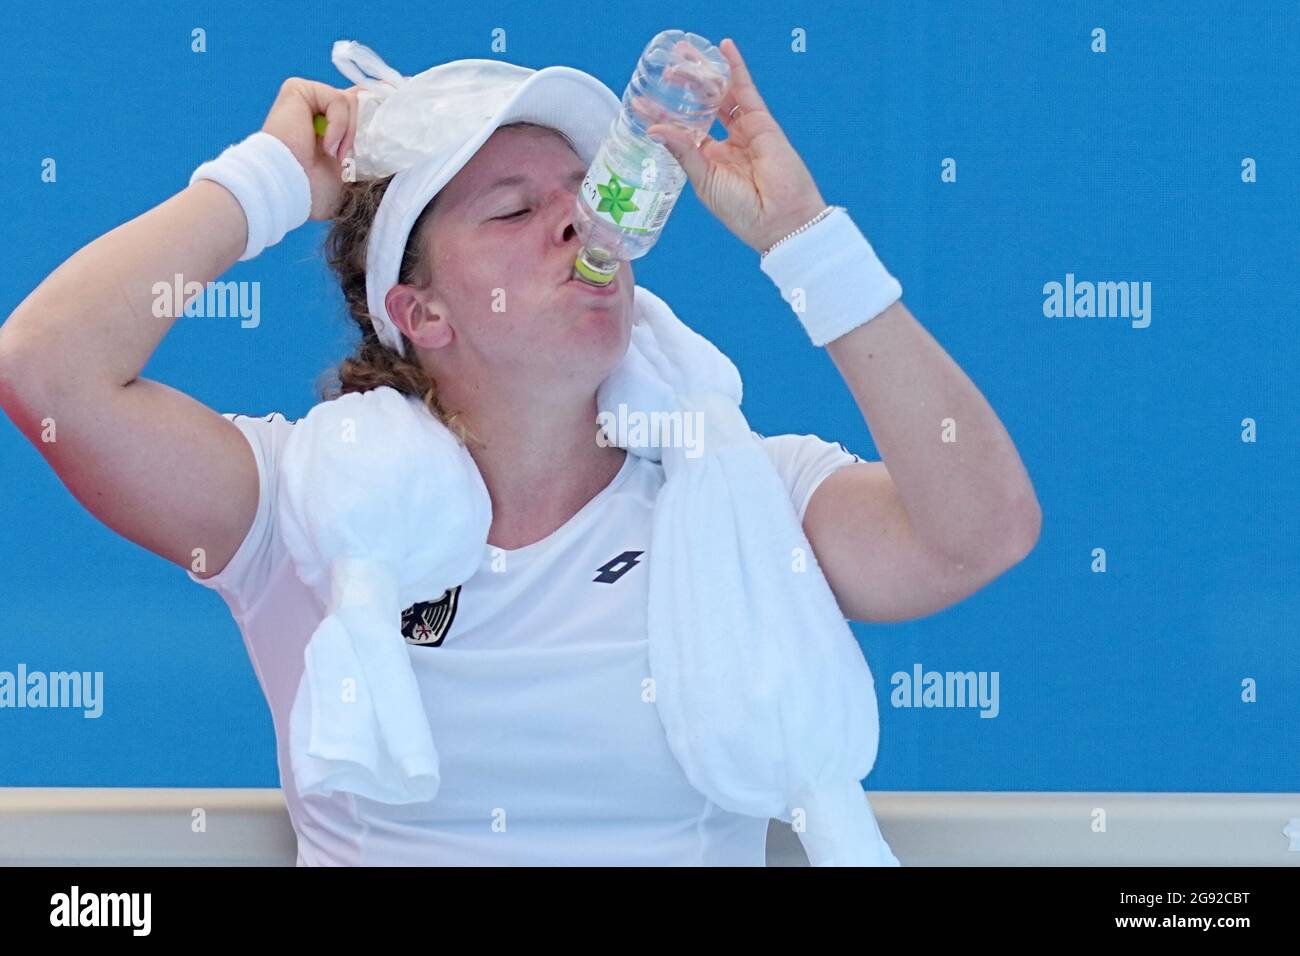 Tokyo, Japan. 24th July, 2021. Tennis: Olympics, women's singles, 1st round, Friedsam (Germany) - Watson (Great Britain) at Ariake Tennis Park. Anna-Lena Friedsam from Germany drinks during the break. Credit: Michael Kappeler/dpa/Alamy Live News Stock Photo